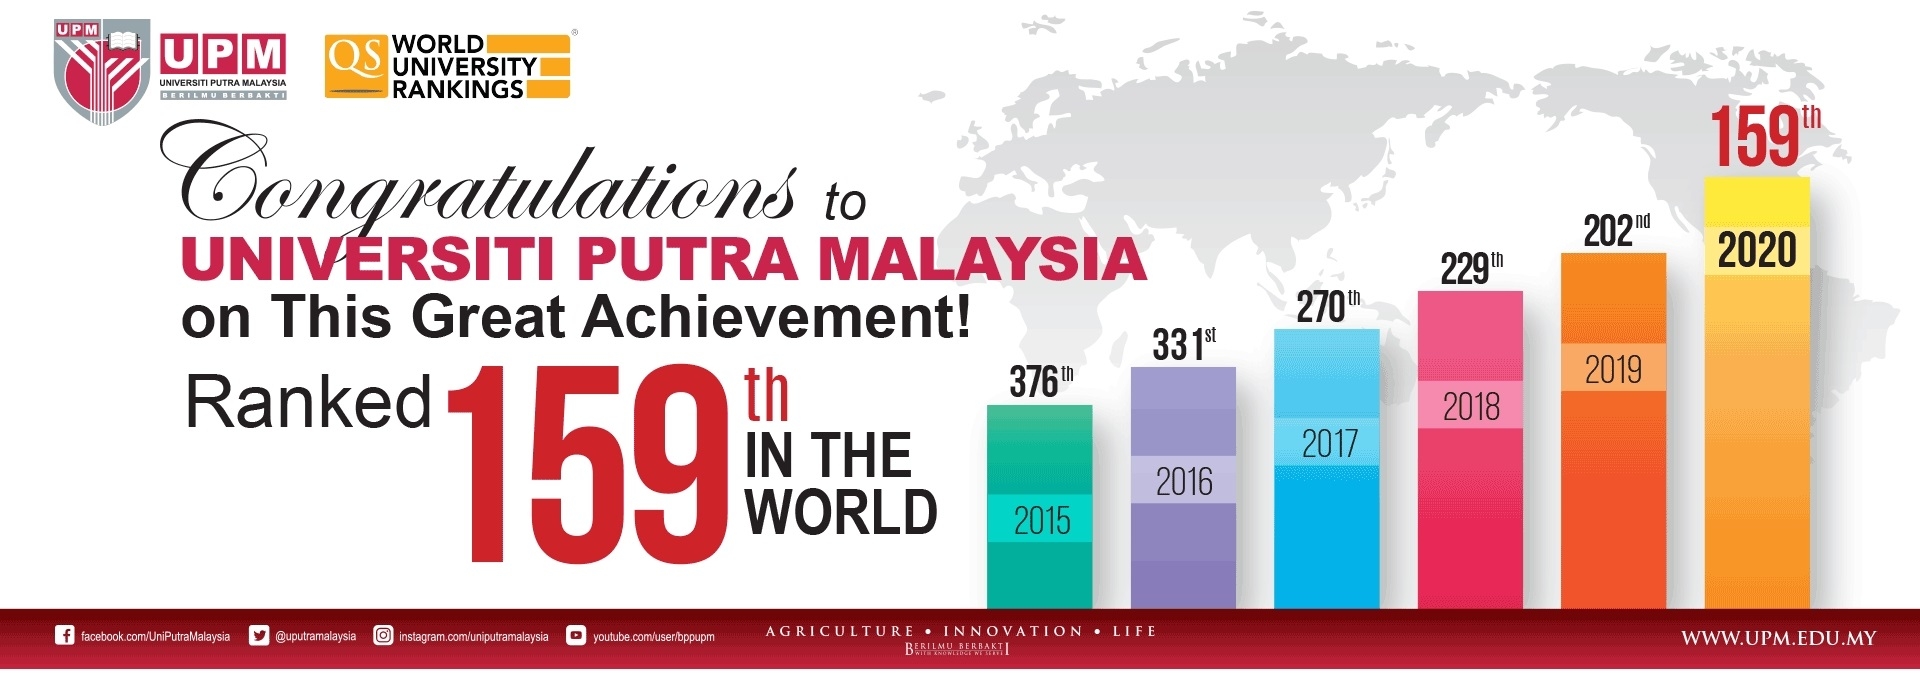 UPM MADE THE HIGHEST LEAP IN THE COUNTRY IN WORLD BEST UNIVERSITY RANKINGS